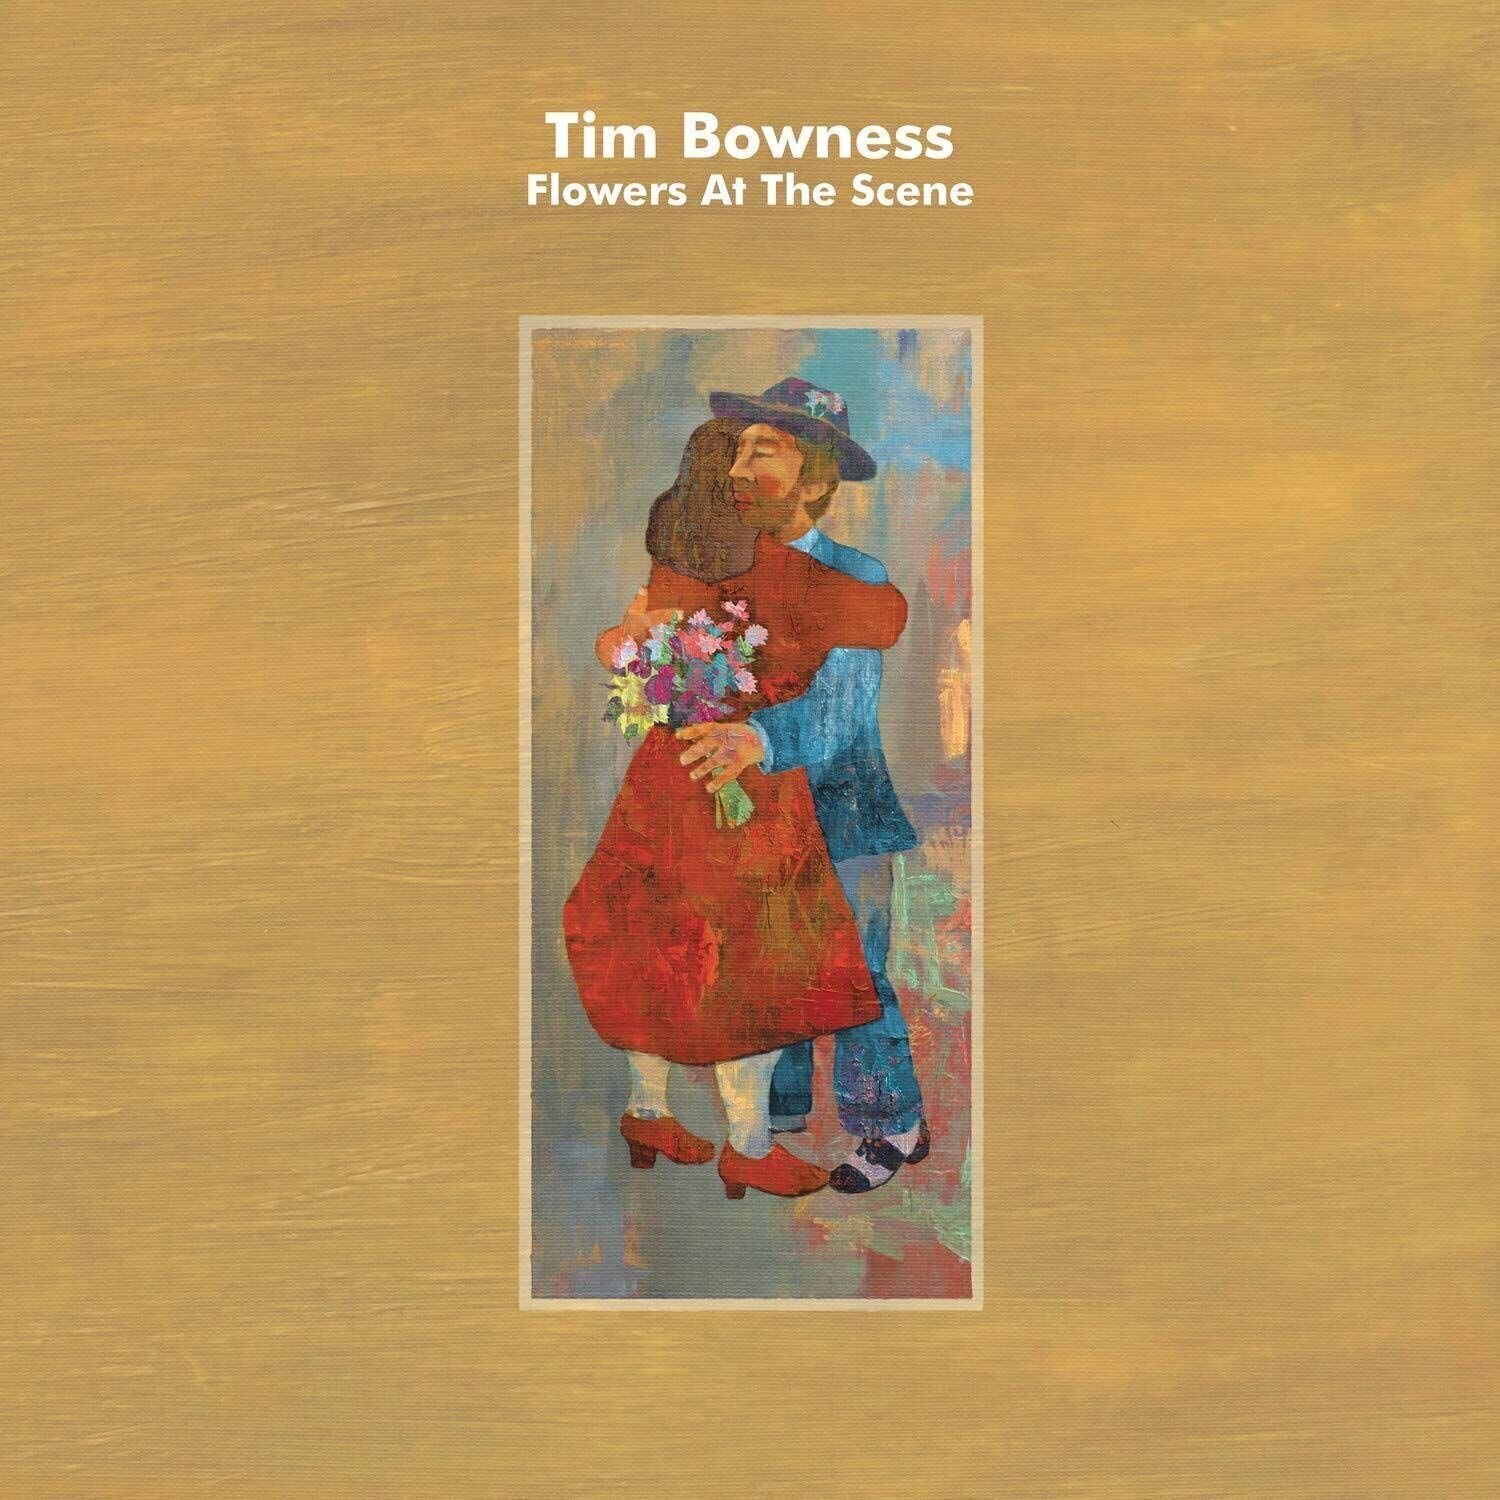 Disco in vinile Tim Bowness - Flowers At the Scene (LP + CD)